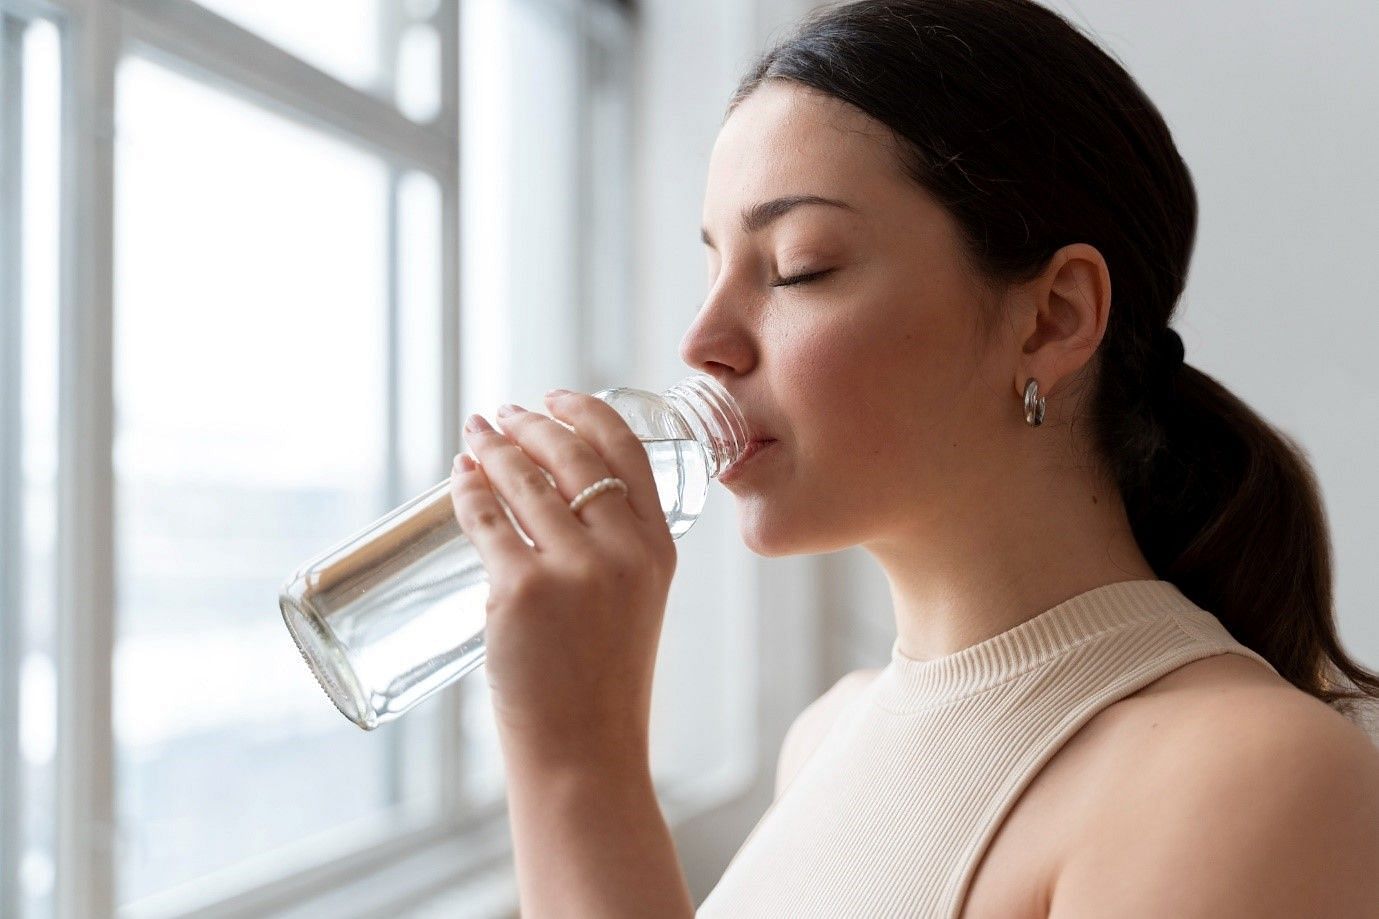 Why is it necessary to have fluid balance in the body? (image by freepik on freepik)